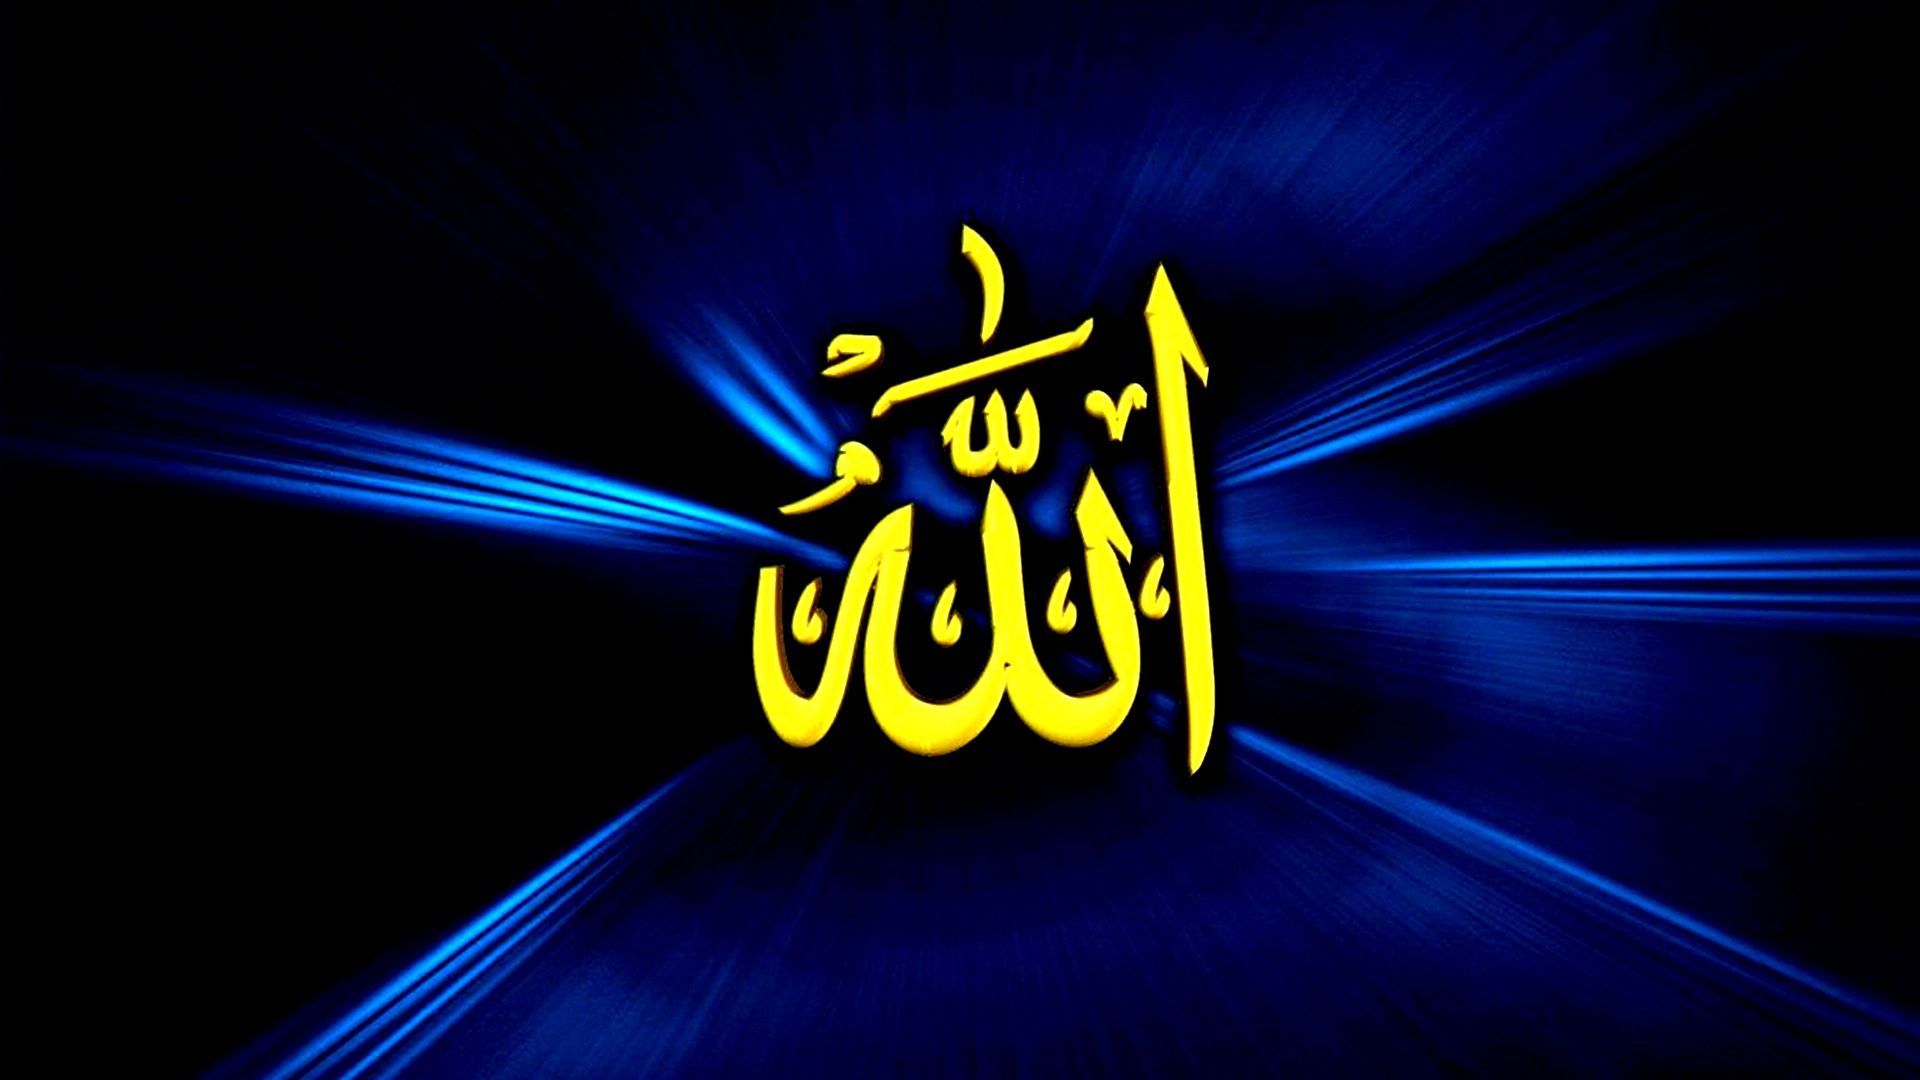 Name of Allah Wallpaper HD Laptop With high-resolution 1920X1080 pixel. You can use and set as wallpaper for Notebook Screensavers, Mac Wallpapers, Mobile Home Screen, iPhone or Android Phones Lock Screen